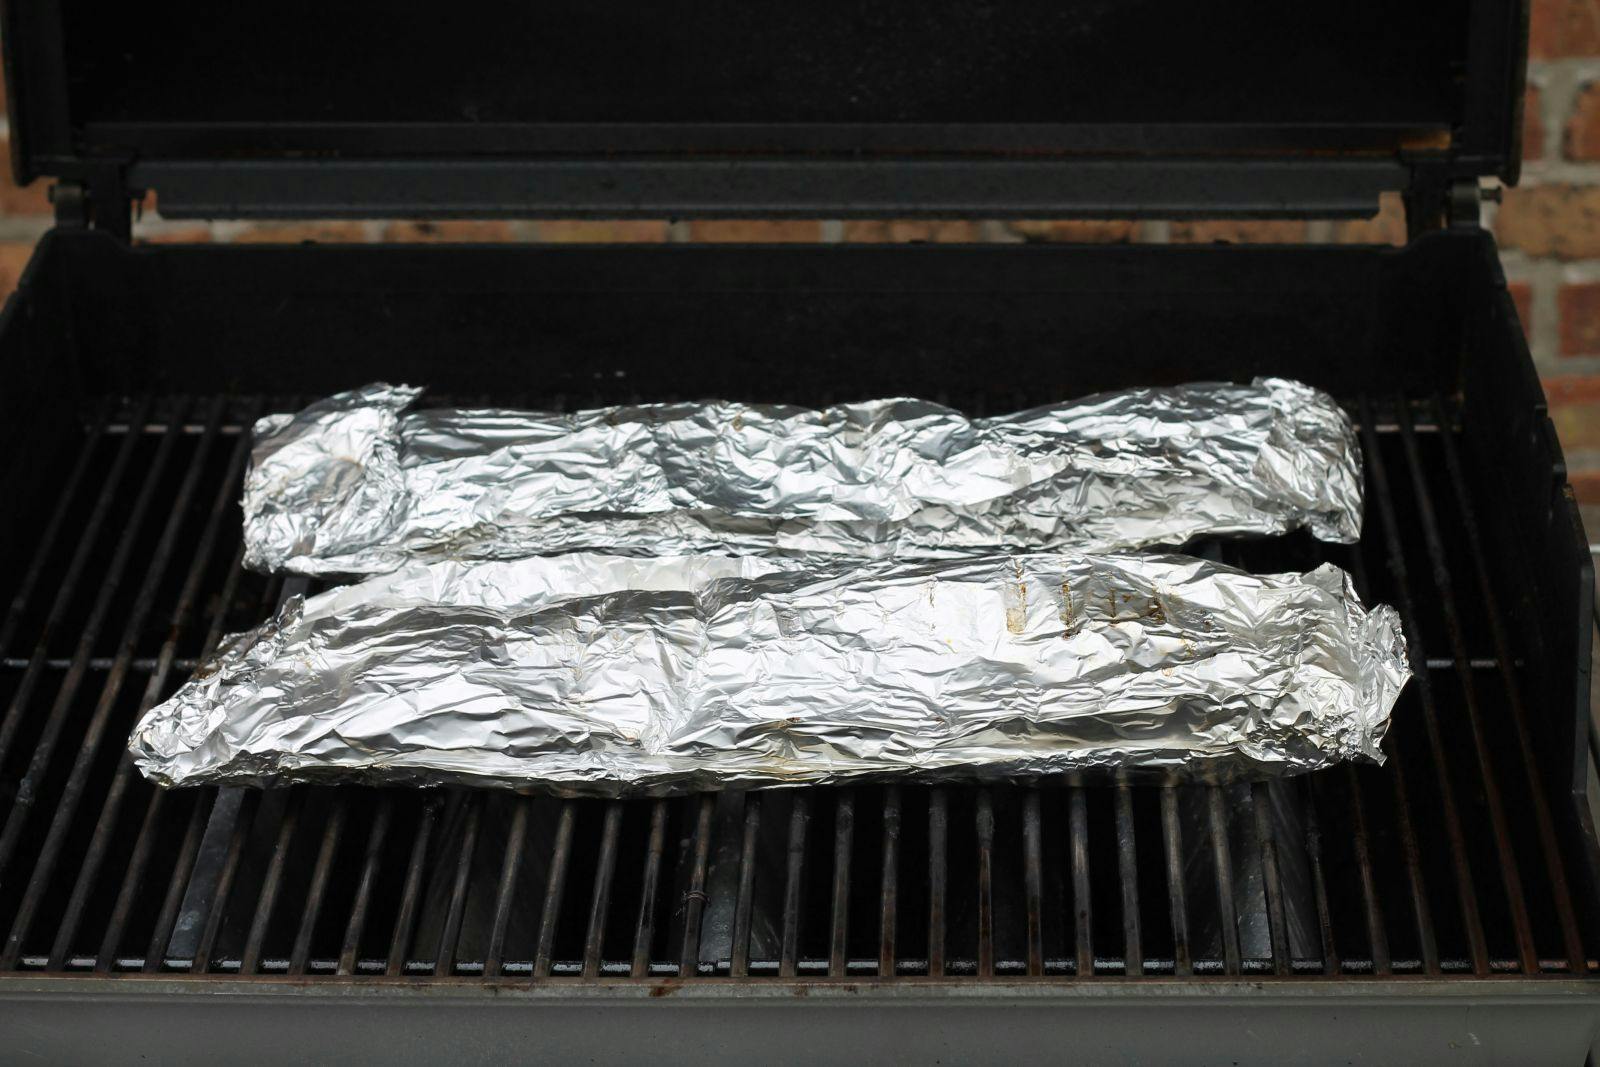 Packets of foil-wrapped ribs on the grill